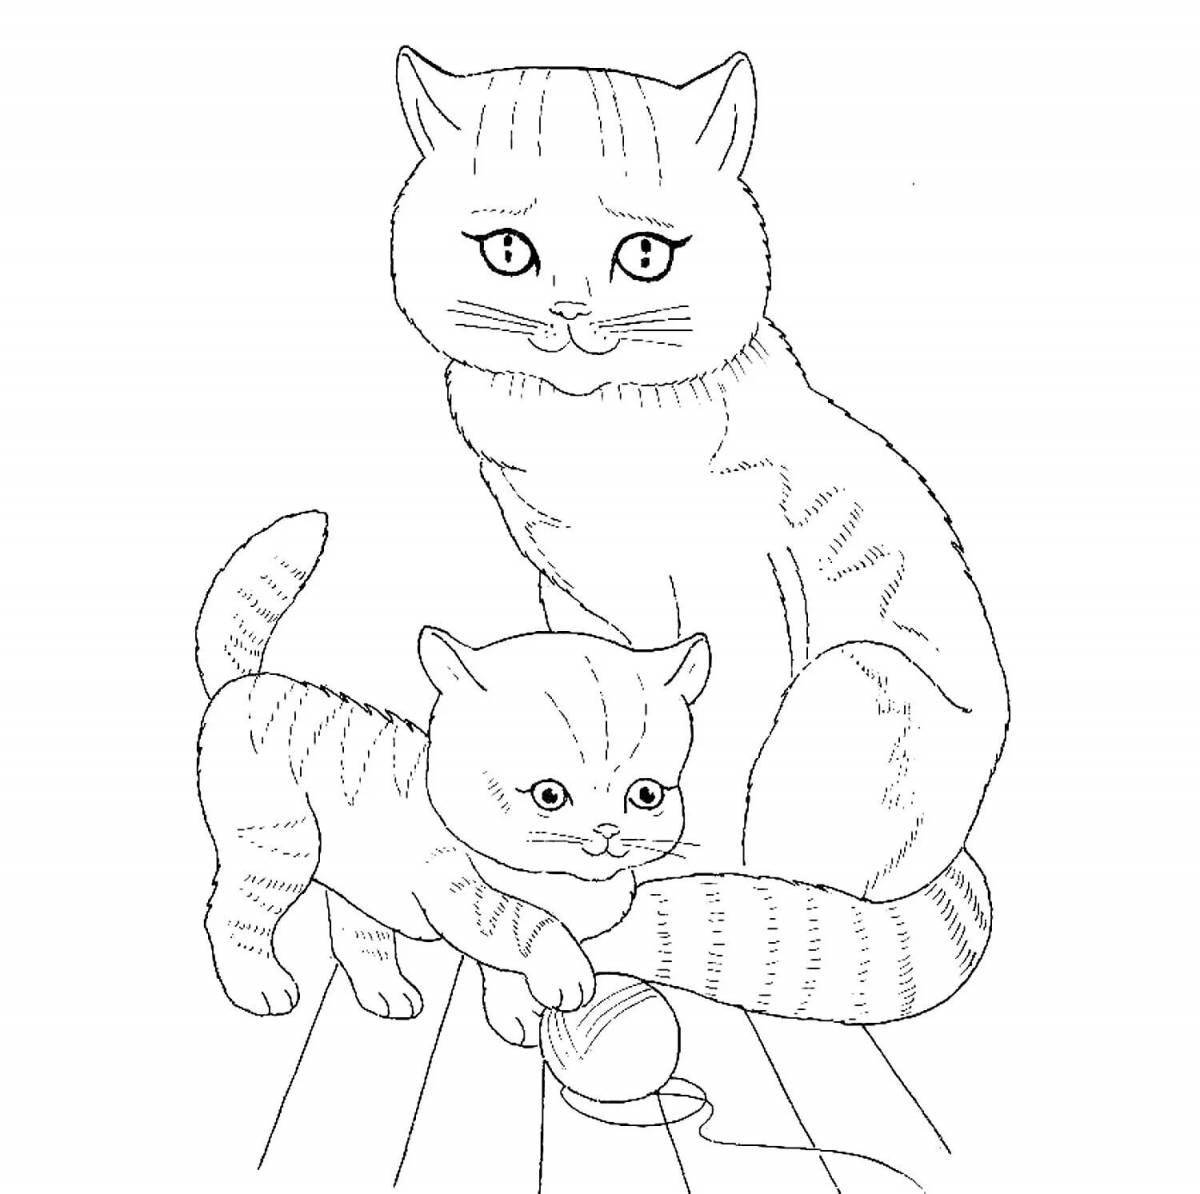 Snuggly kittens coloring book for children 6-7 years old